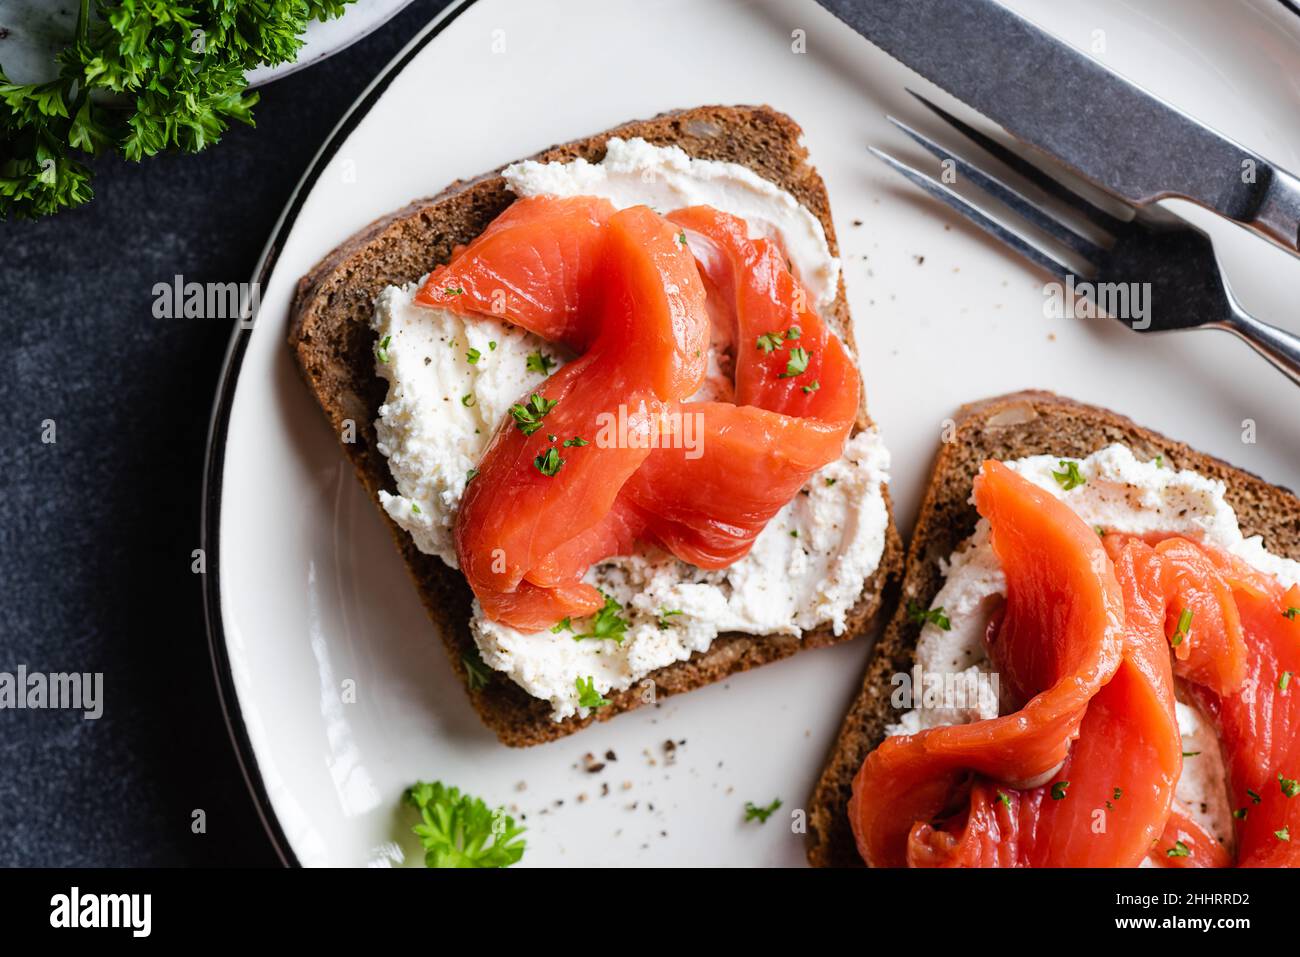 Rye bread toast with cream cheese and salmon on a plate top view. Healthy appetizer or snack open sandwiches Stock Photo